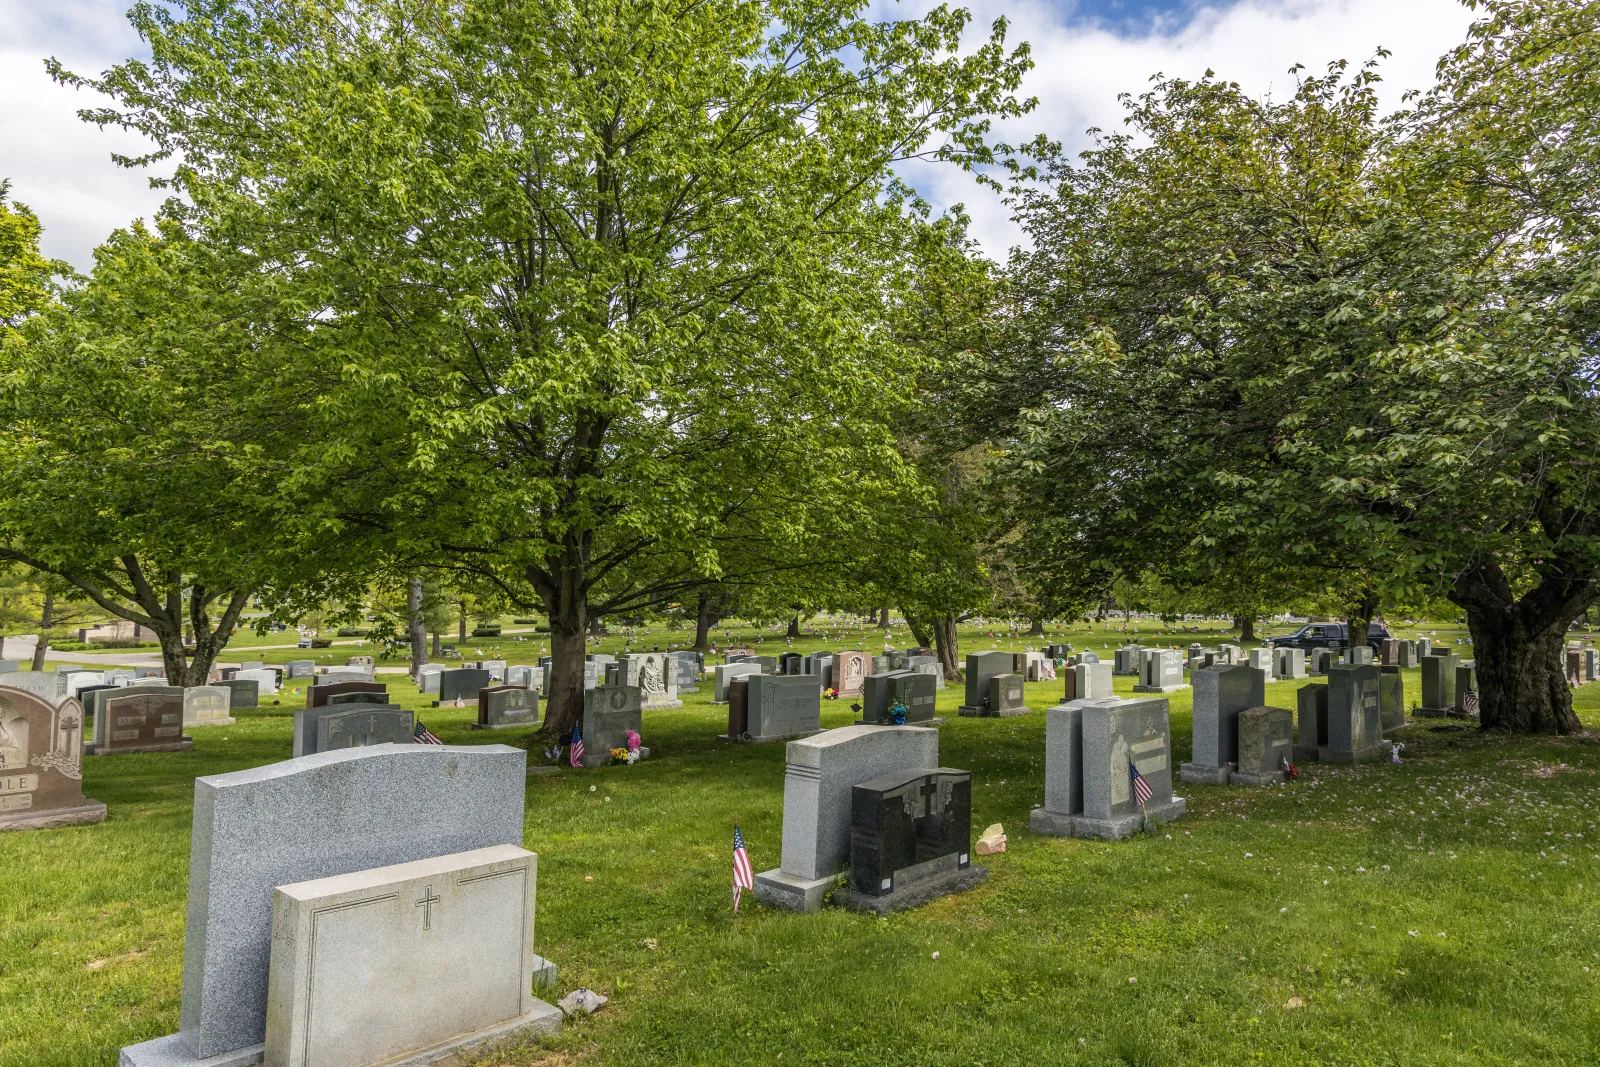 Graves at a cemetery